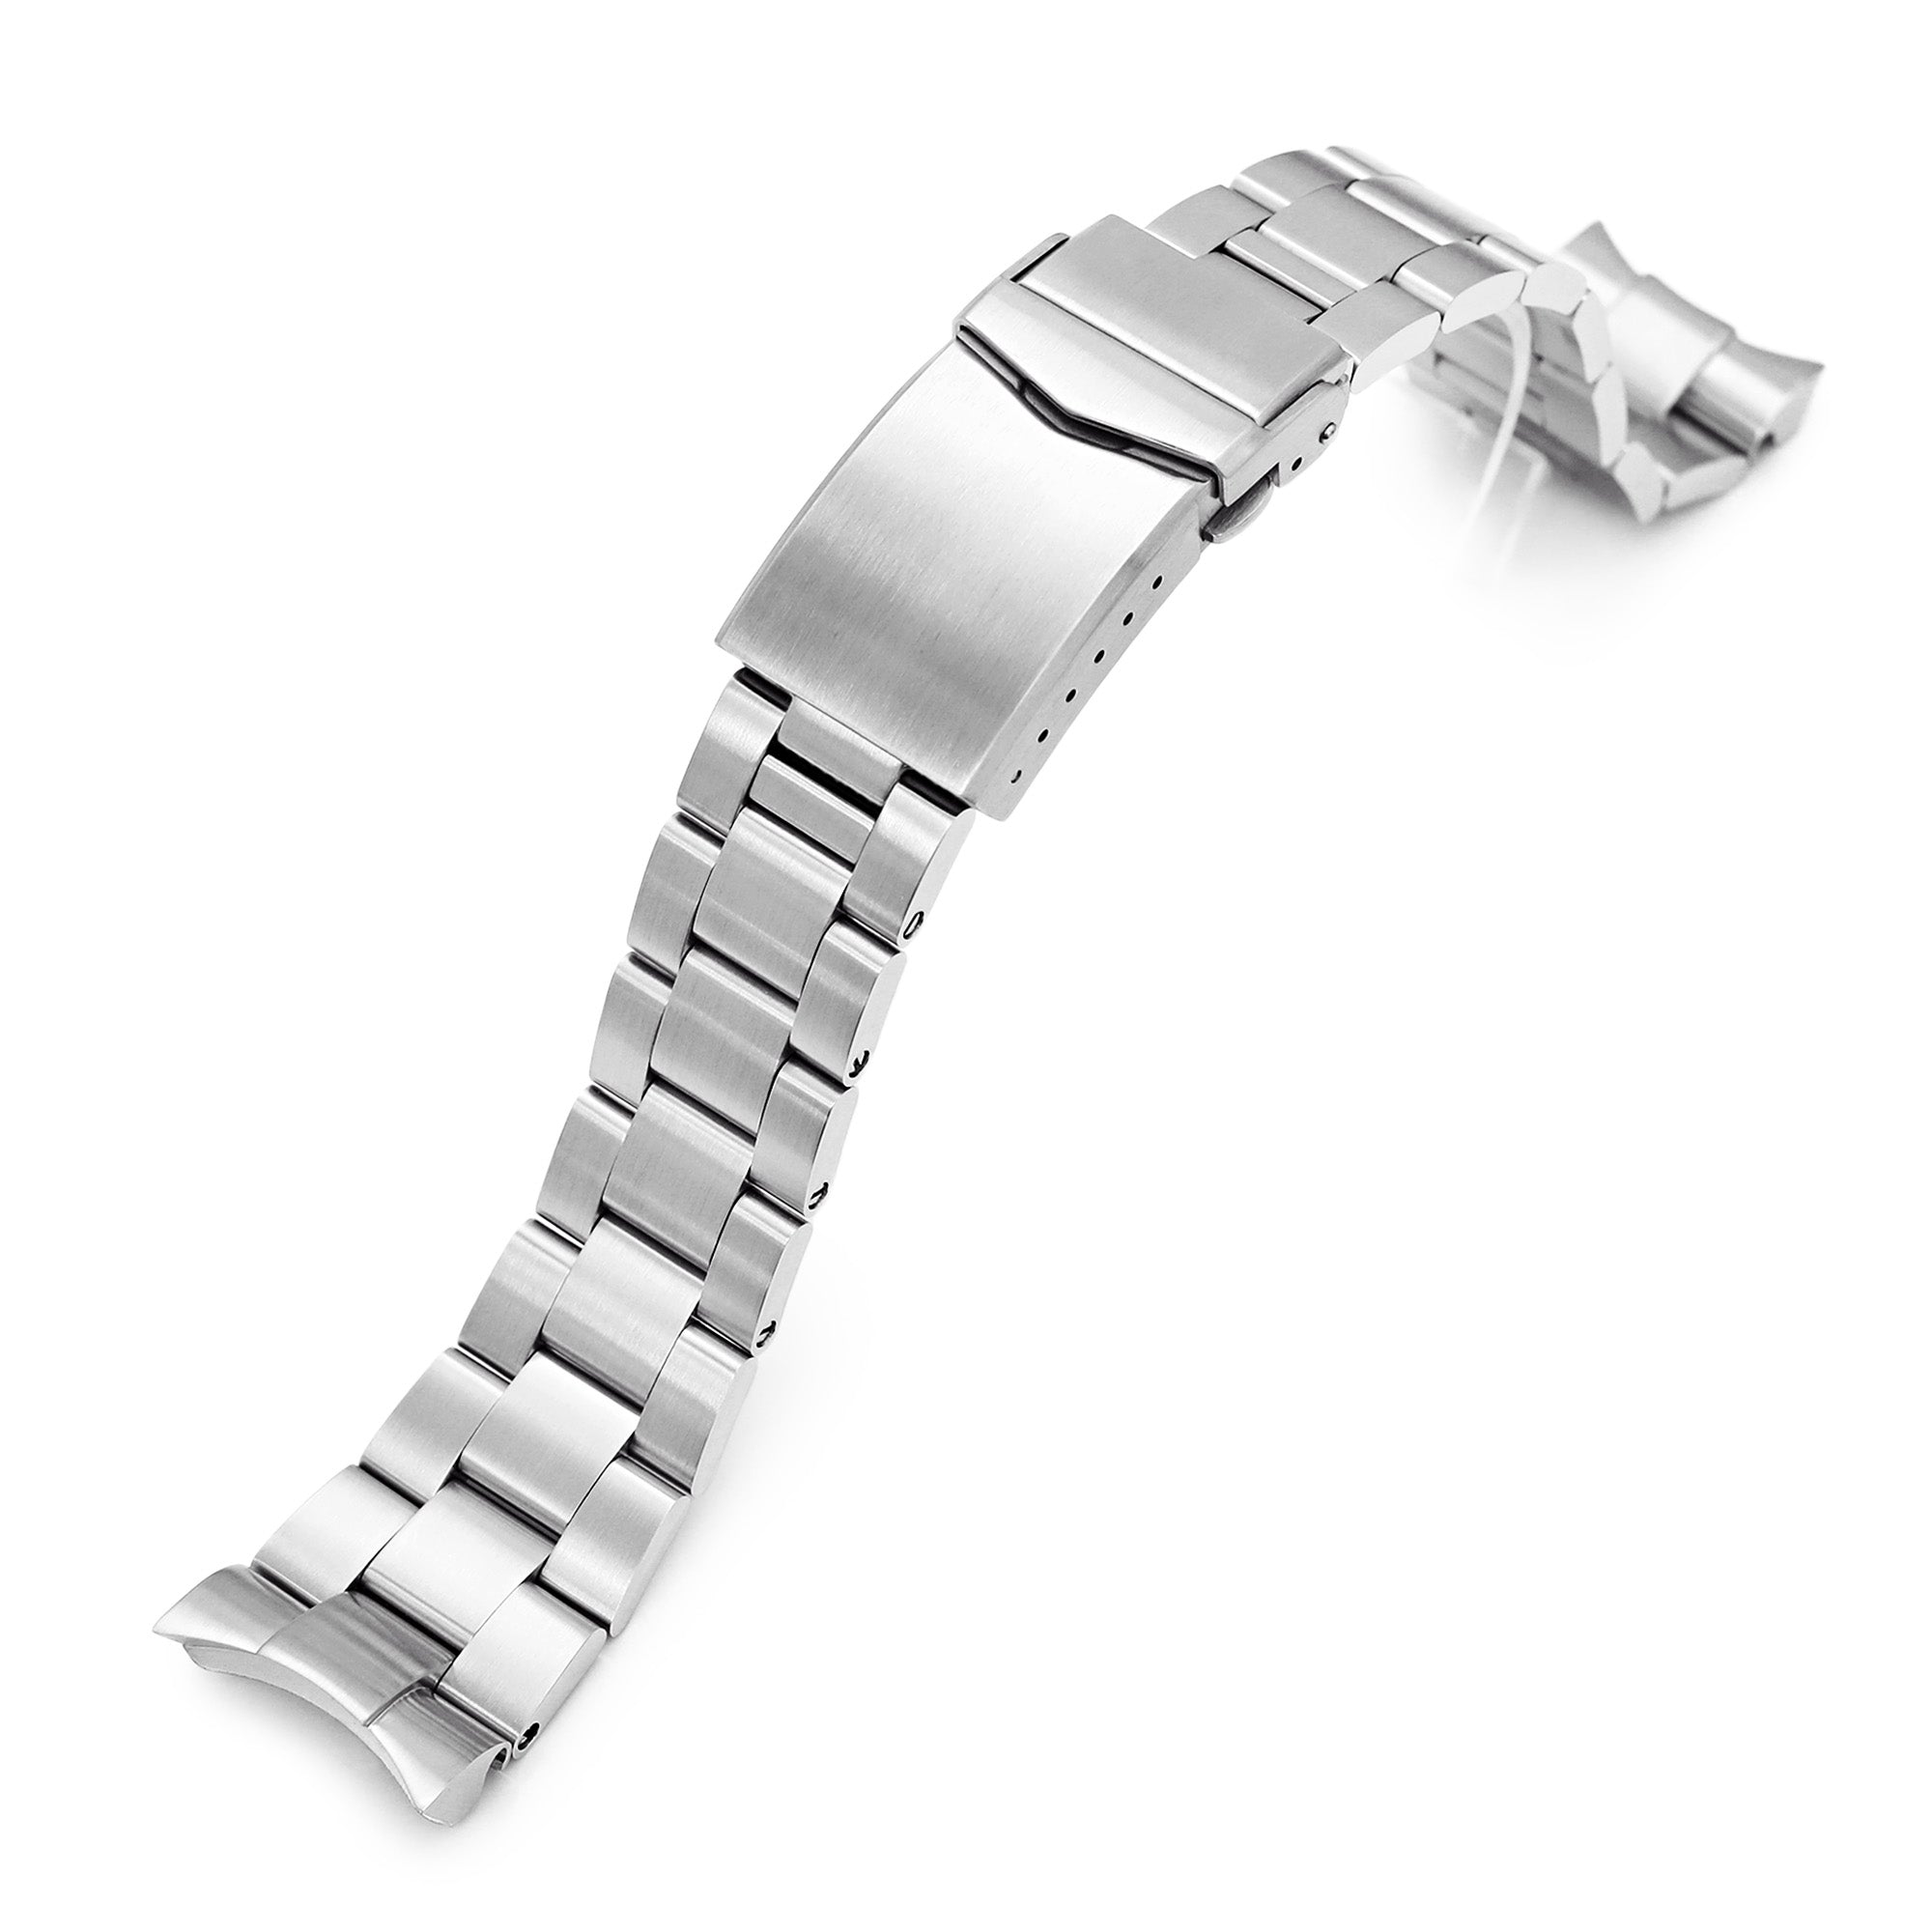 22mm Super-O Boyer 316L Stainless Steel Watch Band for Orient Mako II , Ray II, V-Clasp Button Double Lock Strapcode Watch Bands